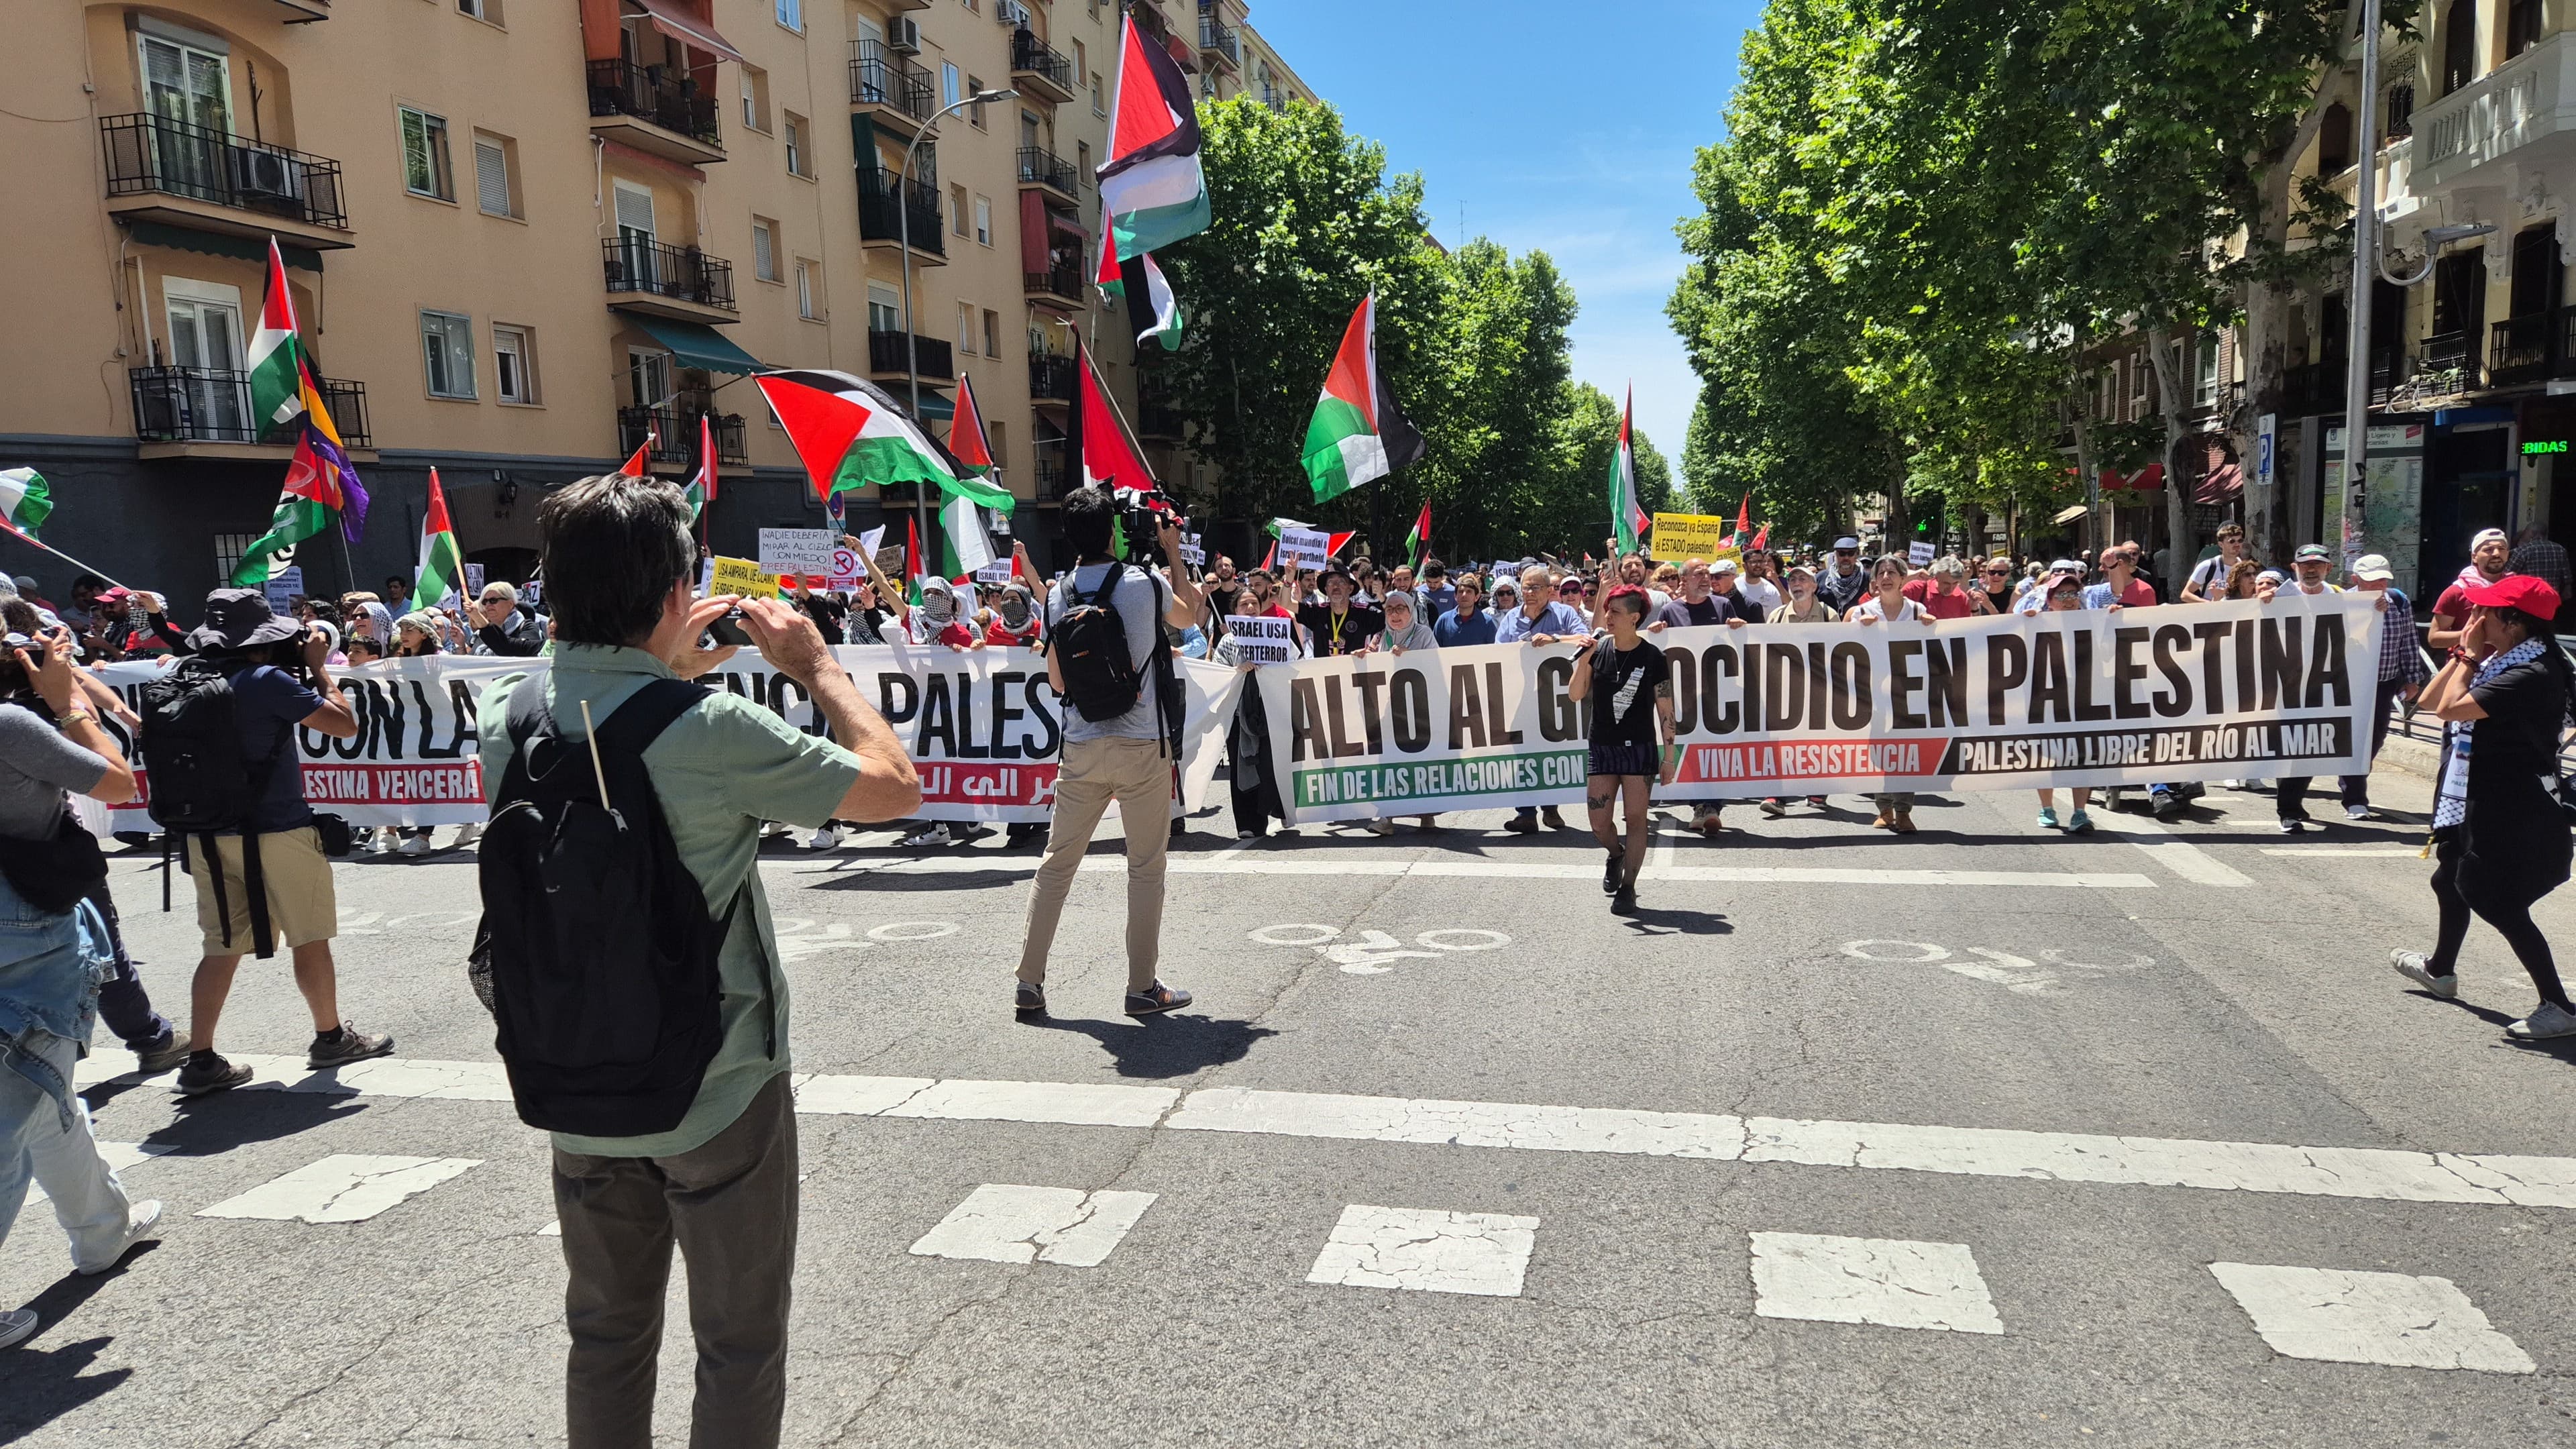 Pro-Palestine camps spring up in Madrid as protest draws thousands